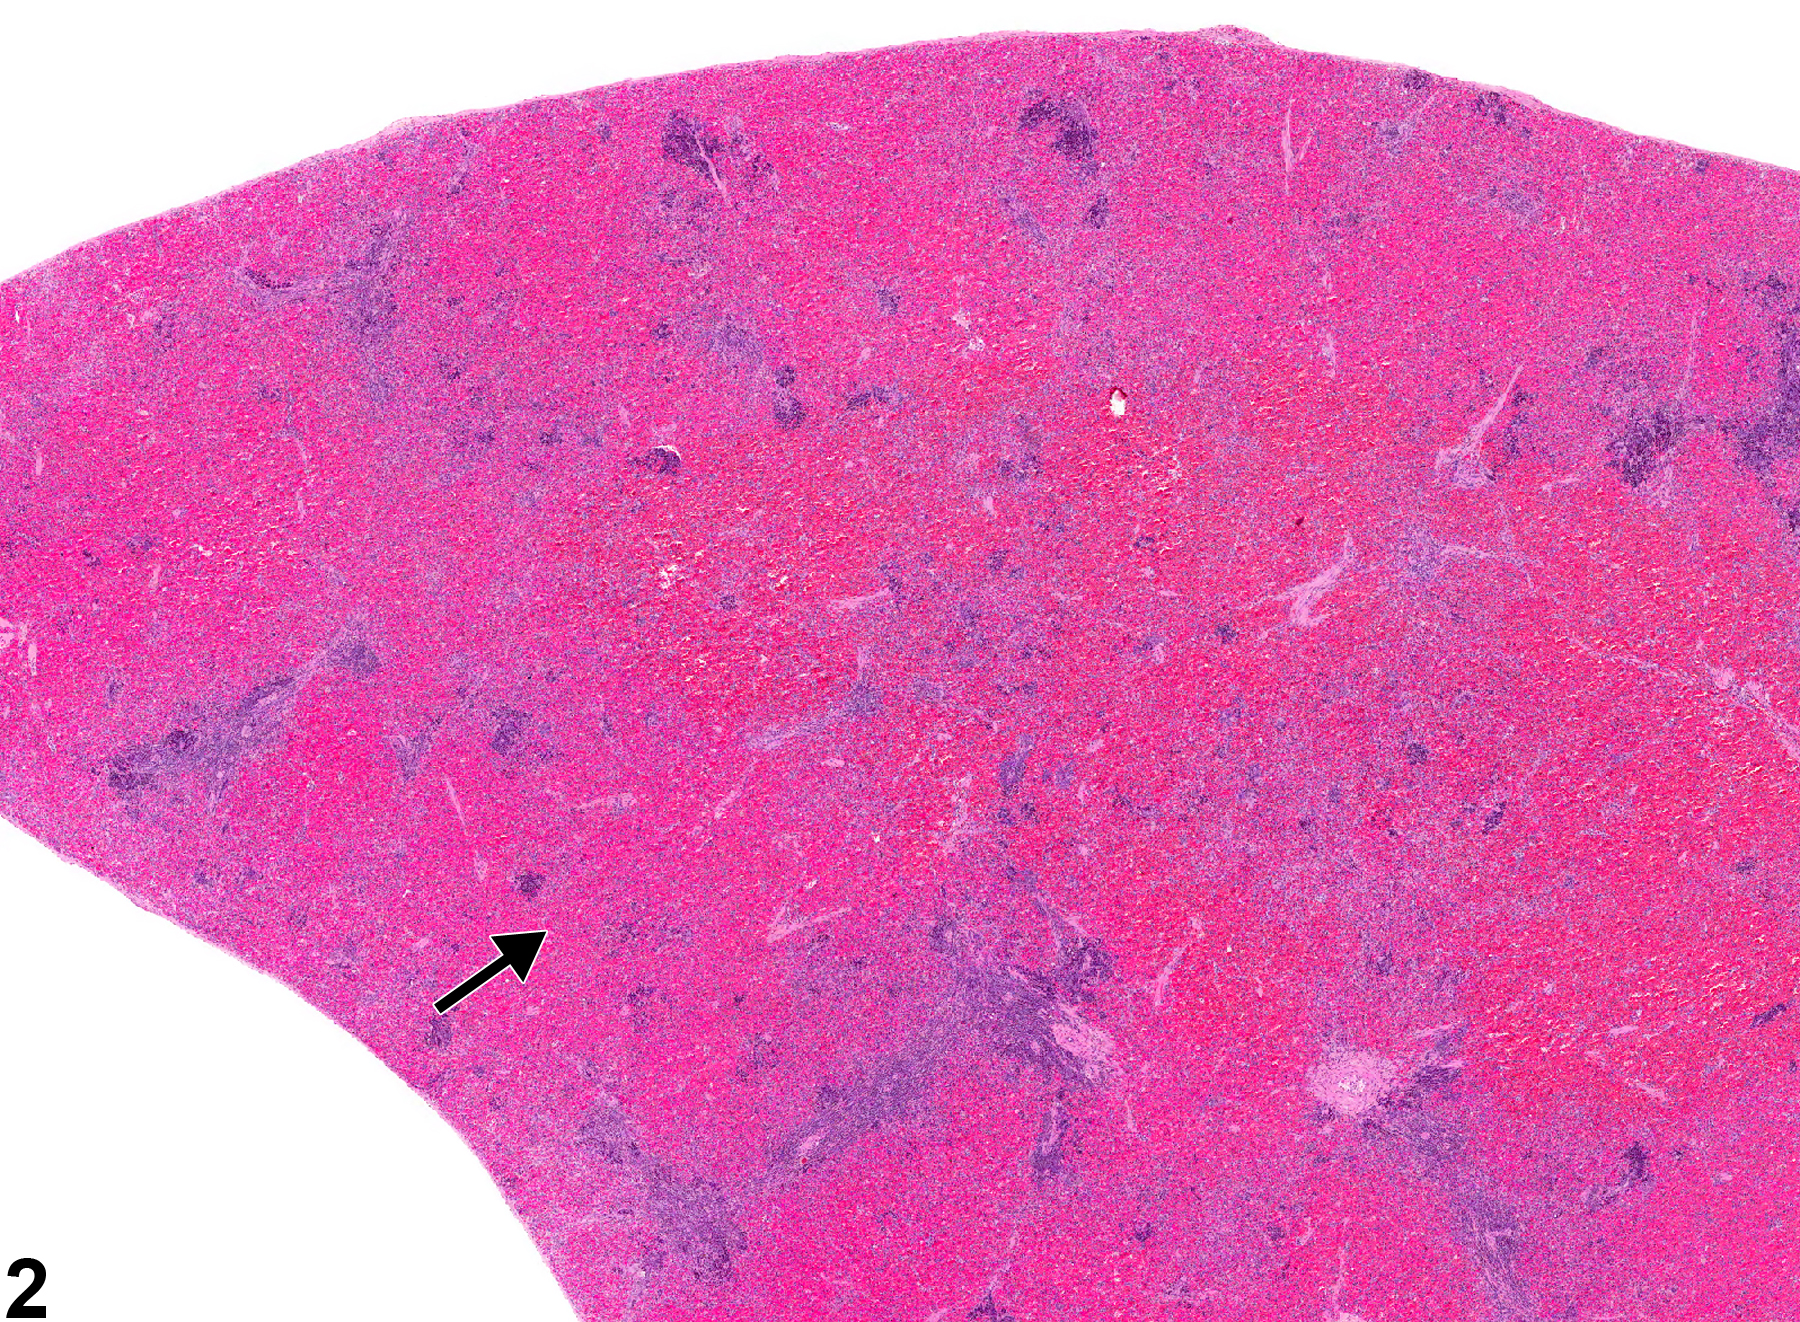 Image of congestion in the spleen from a female F344/N rat in a chronic study